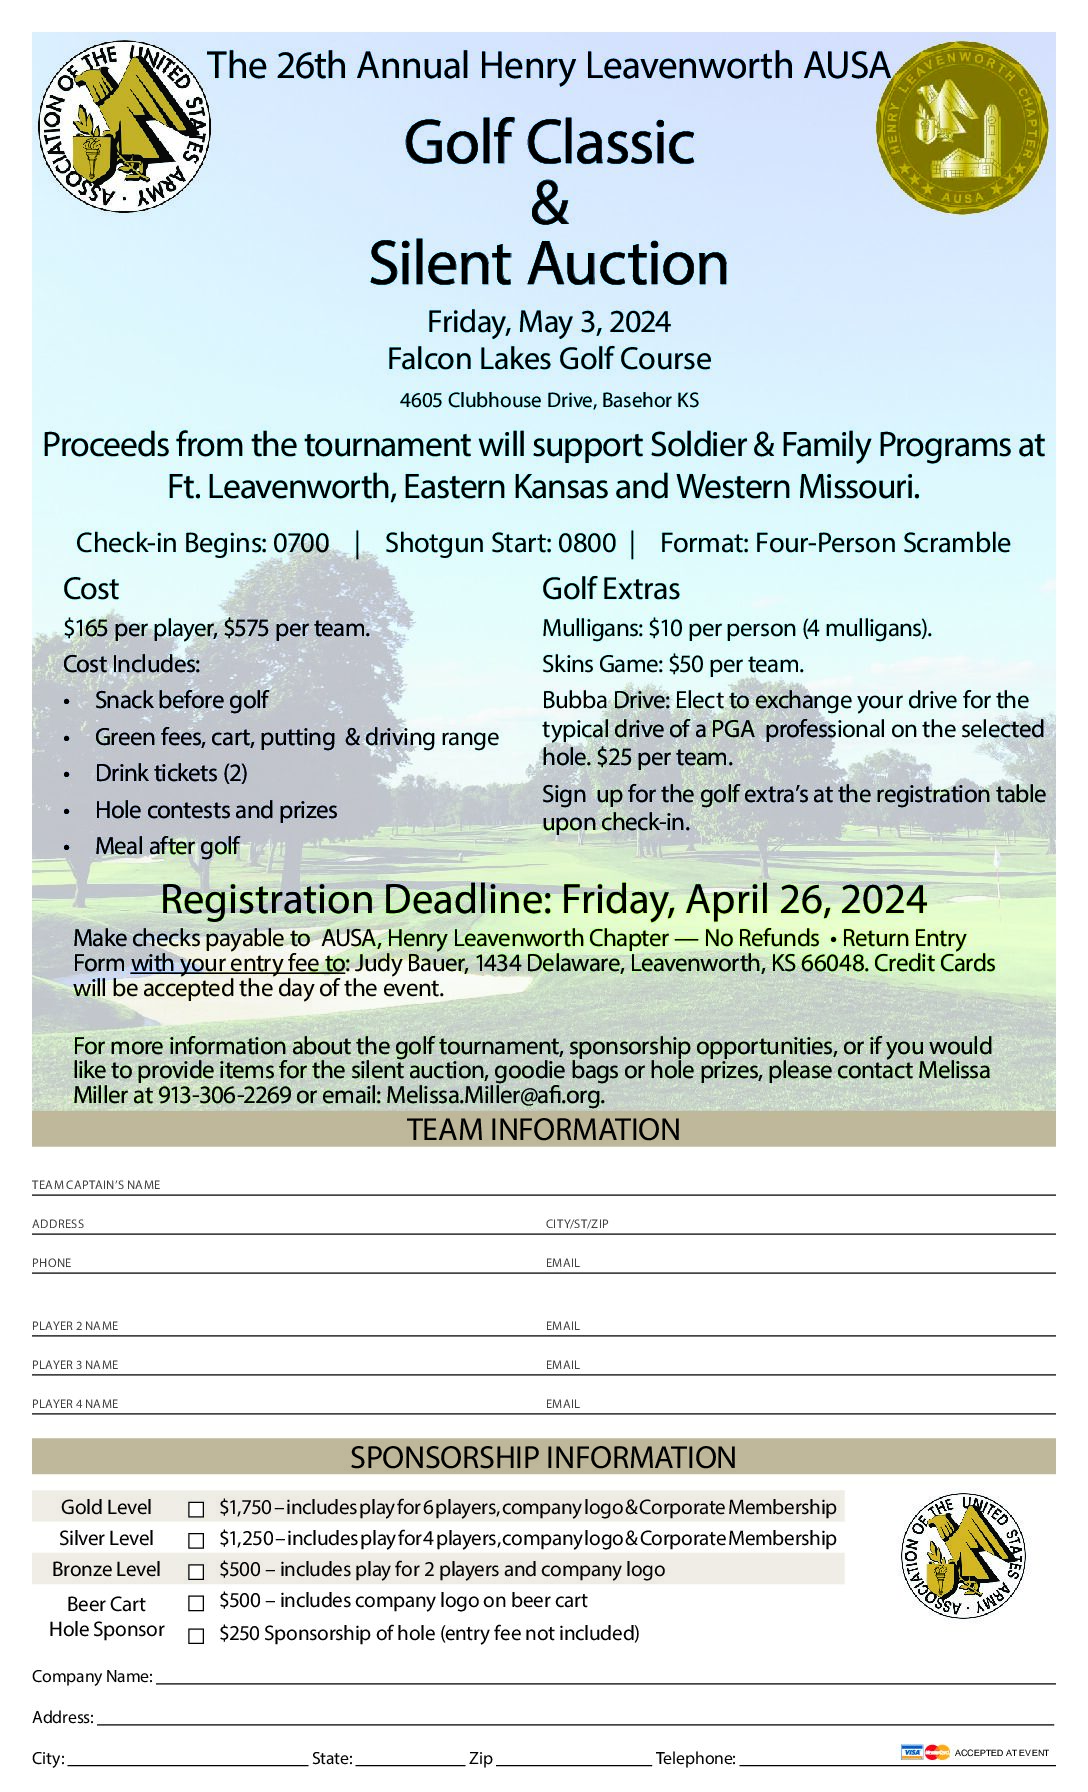 A flyer for The 25th Annual Henry Leavenworth AUSA Golf Classic & Silent Auction.